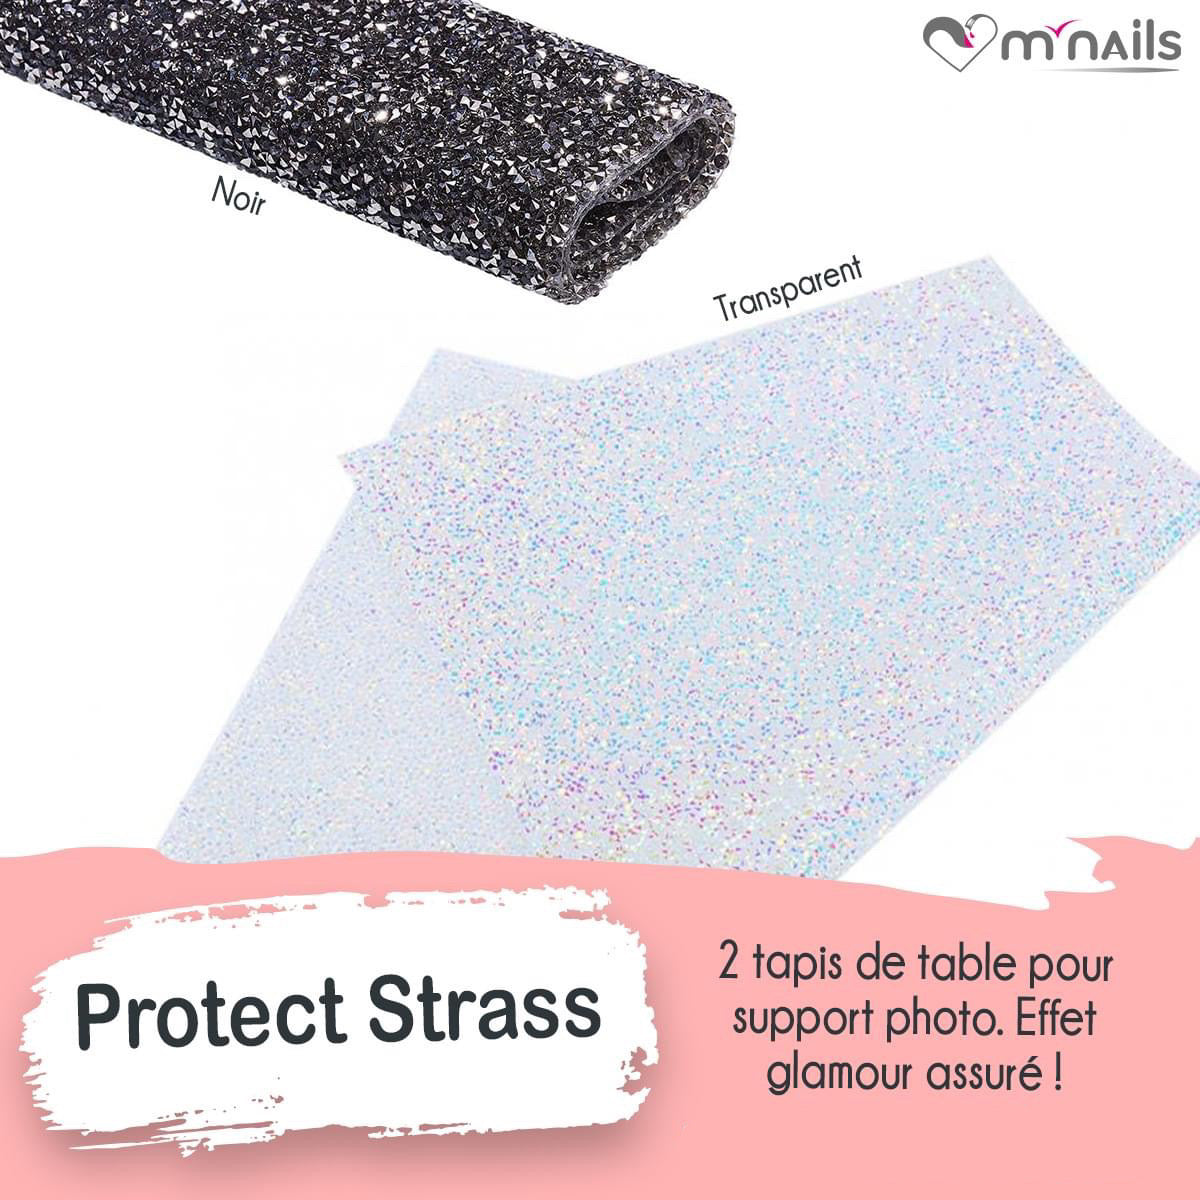 Protect strass